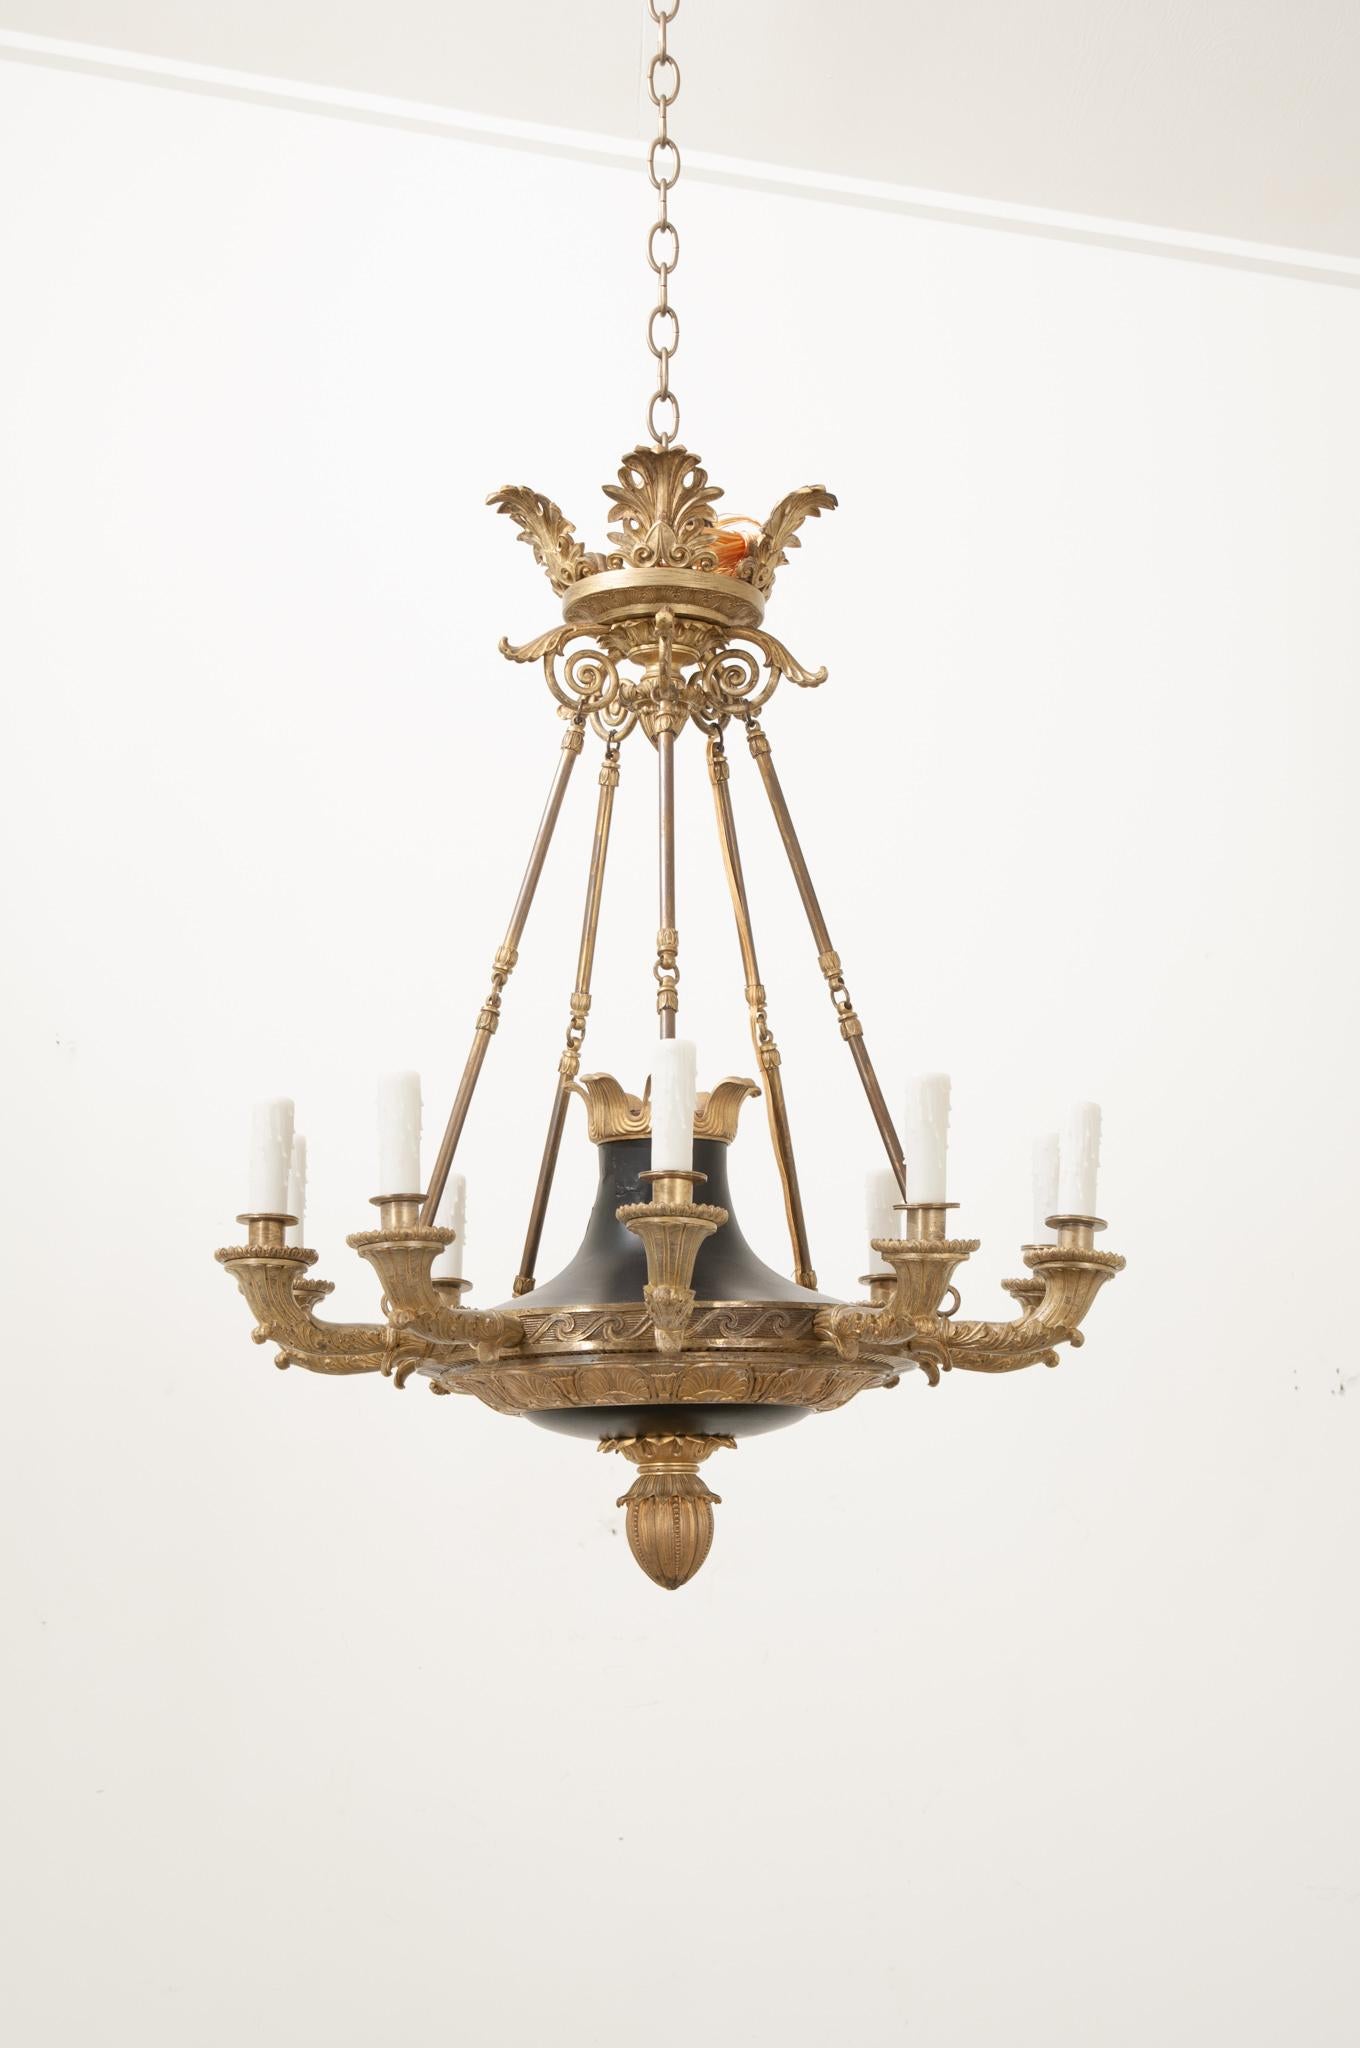 This eye-catching chandelier was crafted in France in the early 1800’s during the 1st Empire period. Composed of a patinated bronze bowl with a cone-shaped neck. The bowl’s base is decorated on its underside with a brass  artichoke drop finial and